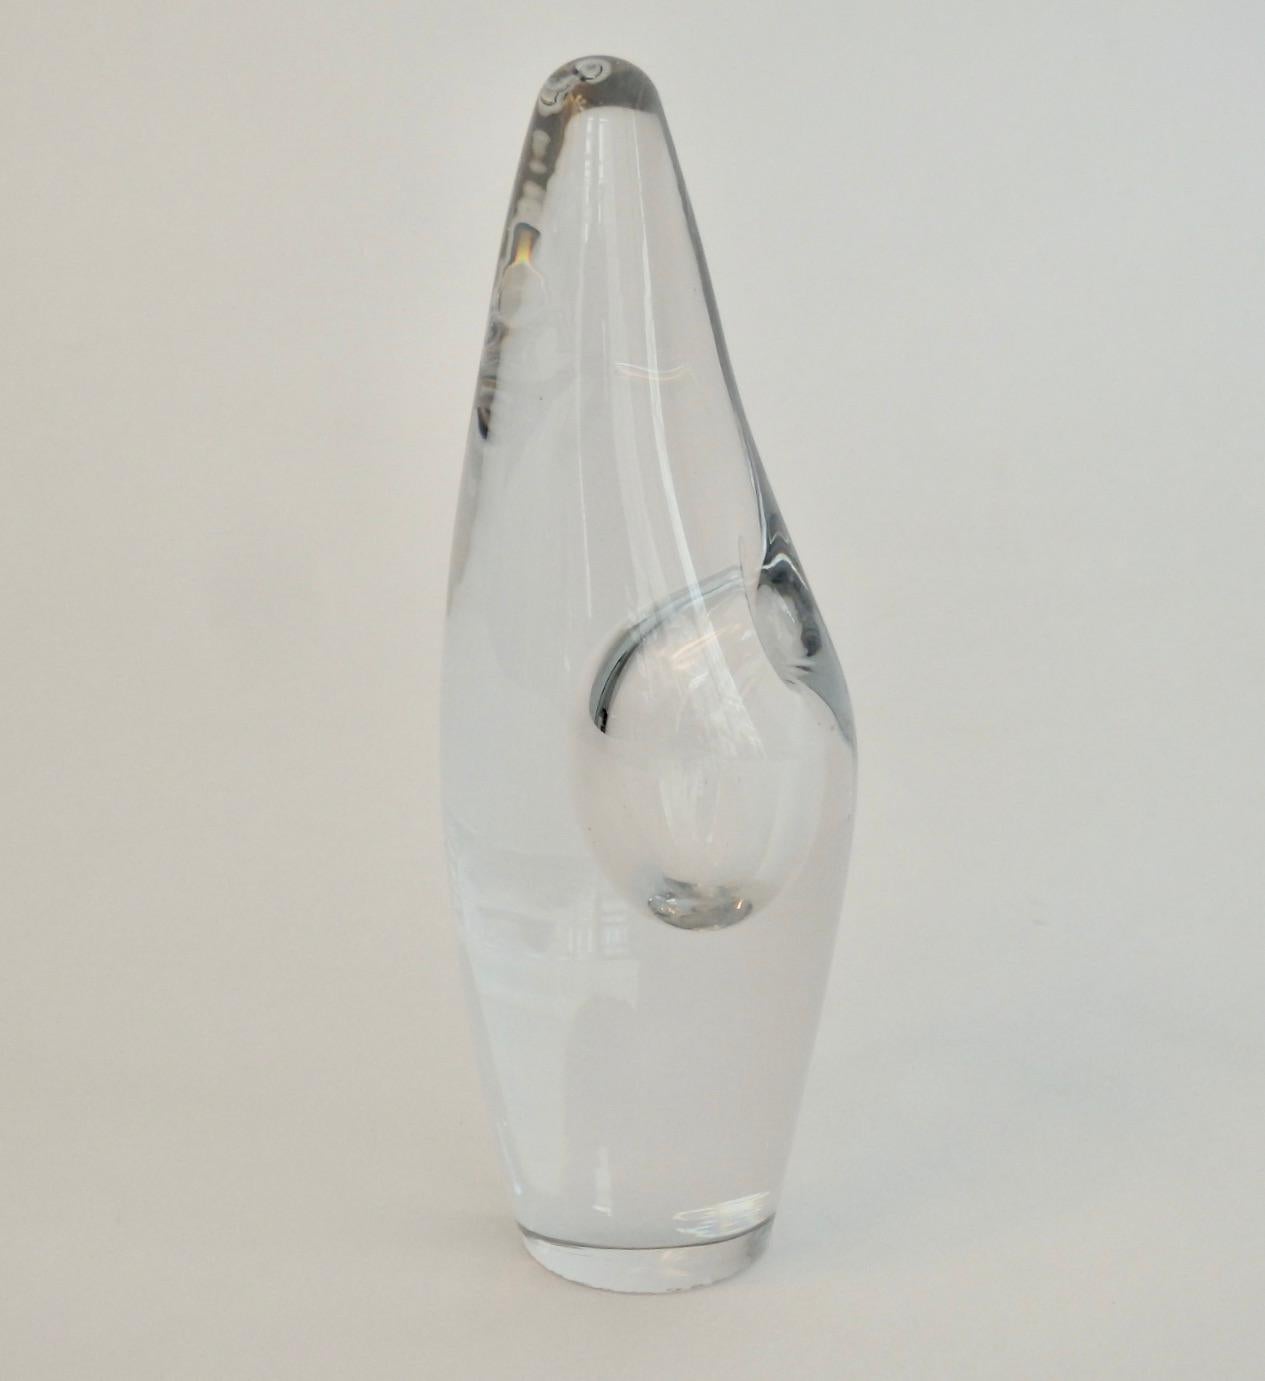 Timo Sarpeneva for Littala Orkidea or Orchid Sculptural Bud Vase In Excellent Condition For Sale In Ferndale, MI